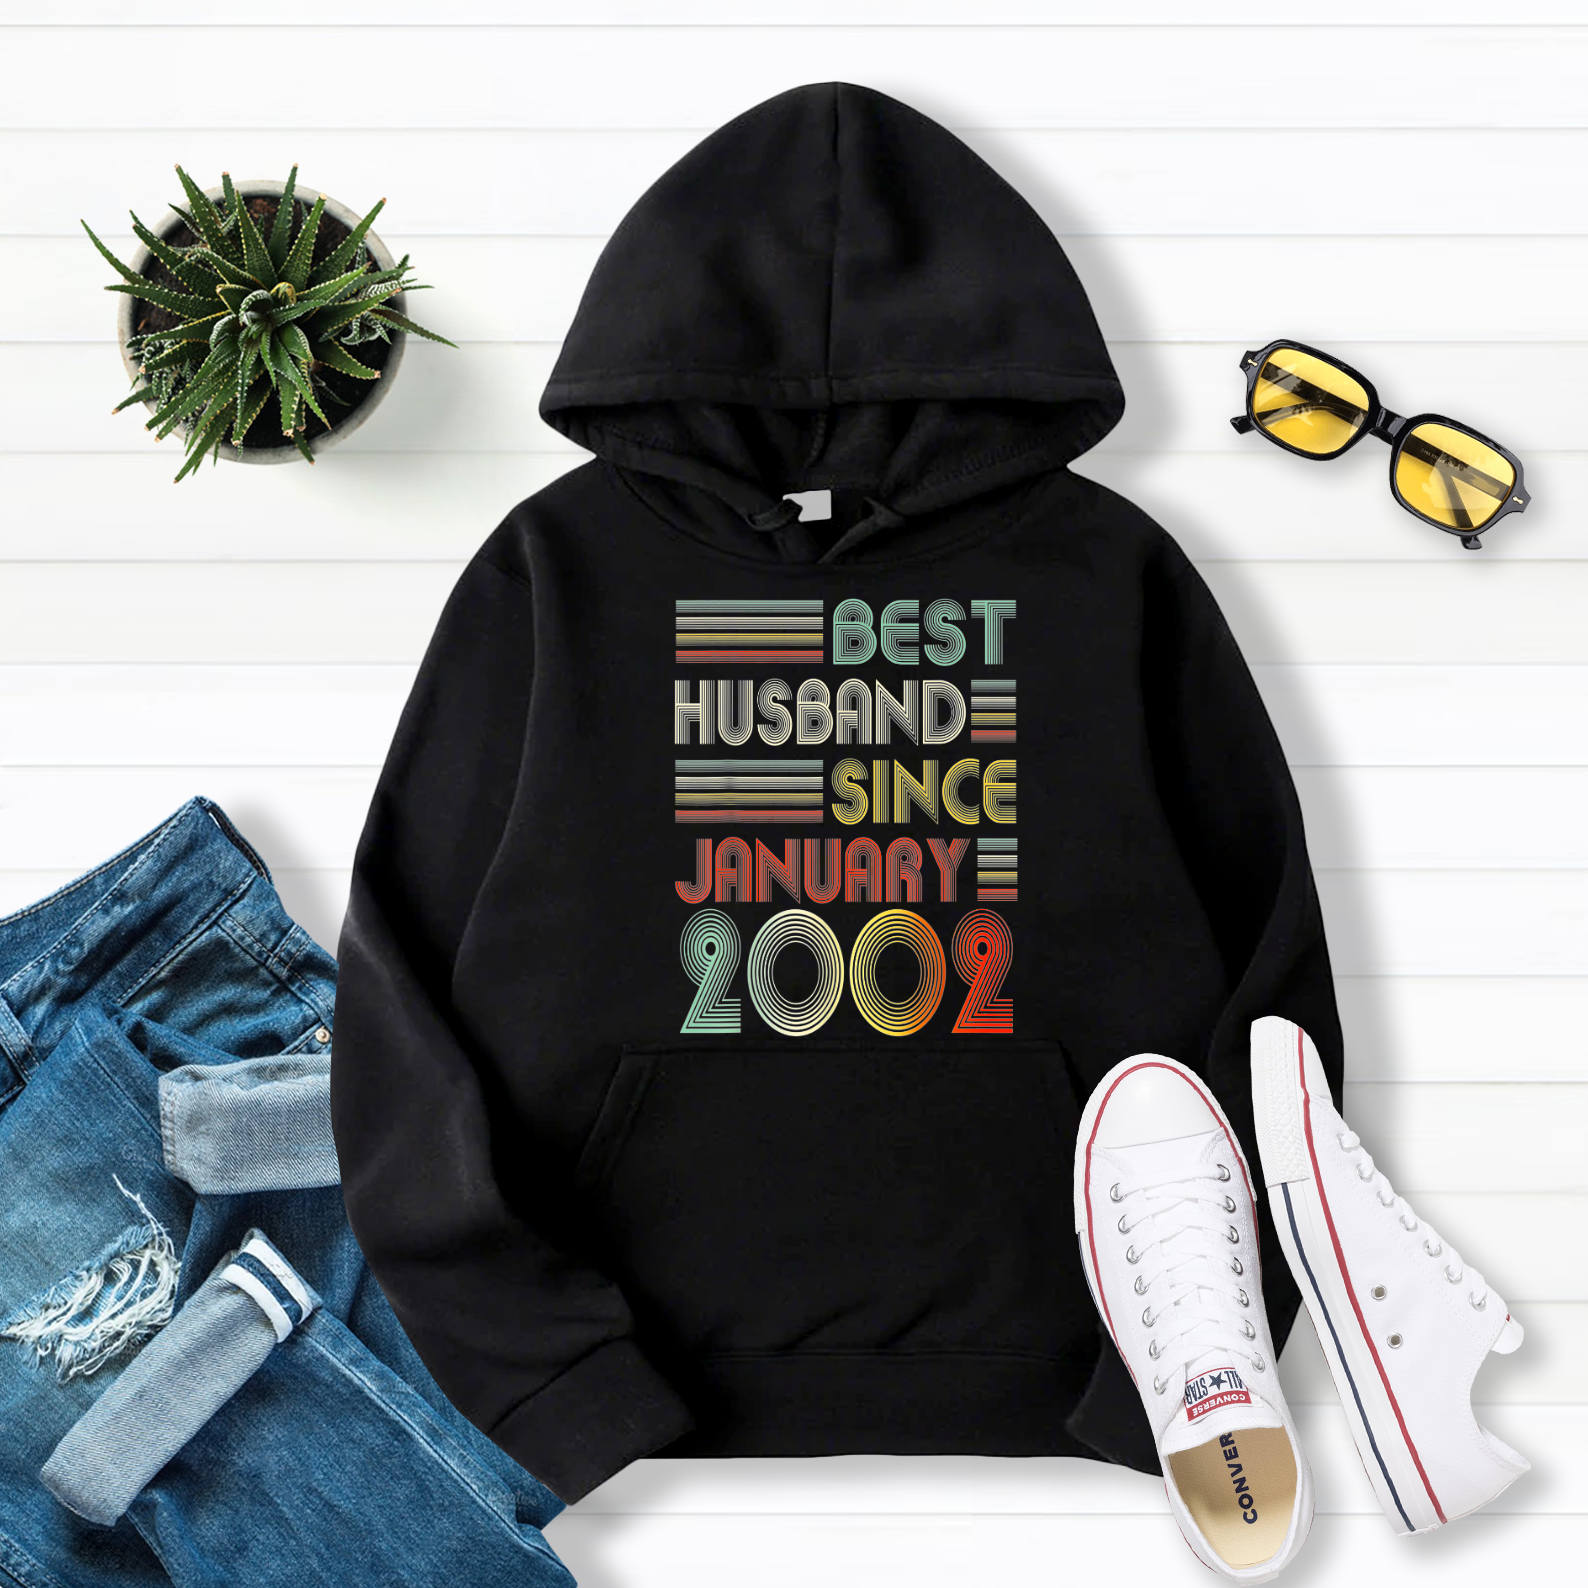 19Th Wedding Anniversary Best Husband Since January 2002 Pullover Hoodie Black S-5XL